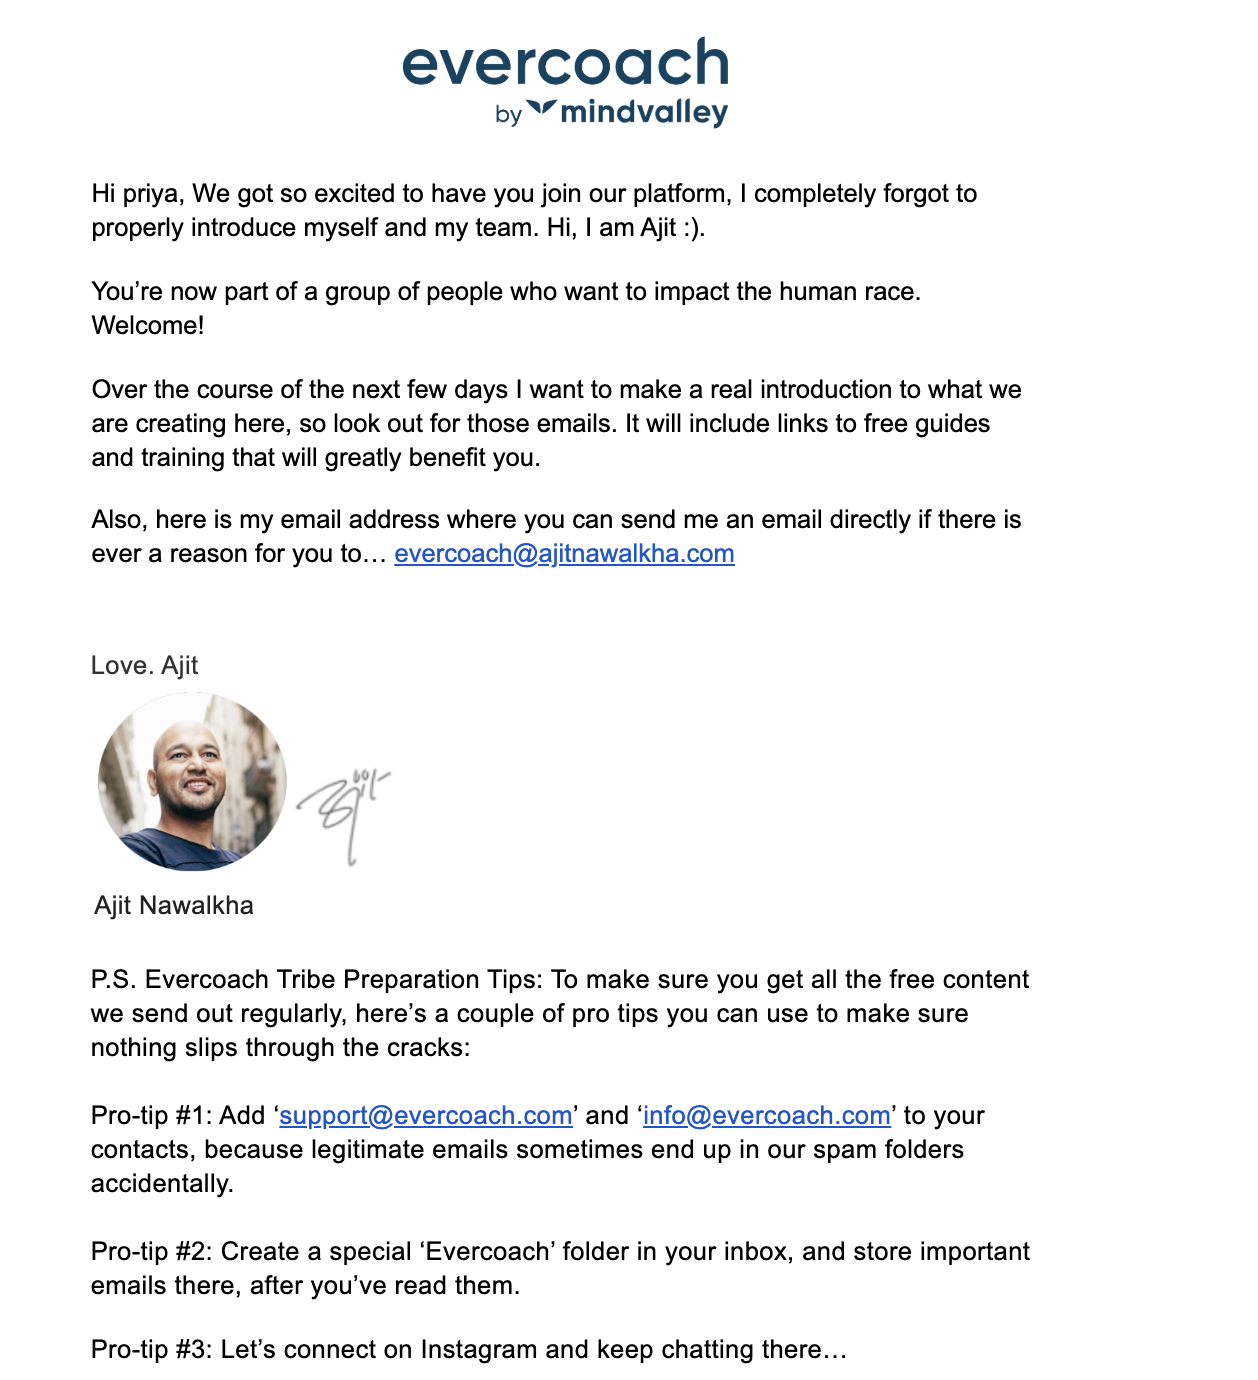 Evercoach by Mindvalley email by Ajit Nawalkha